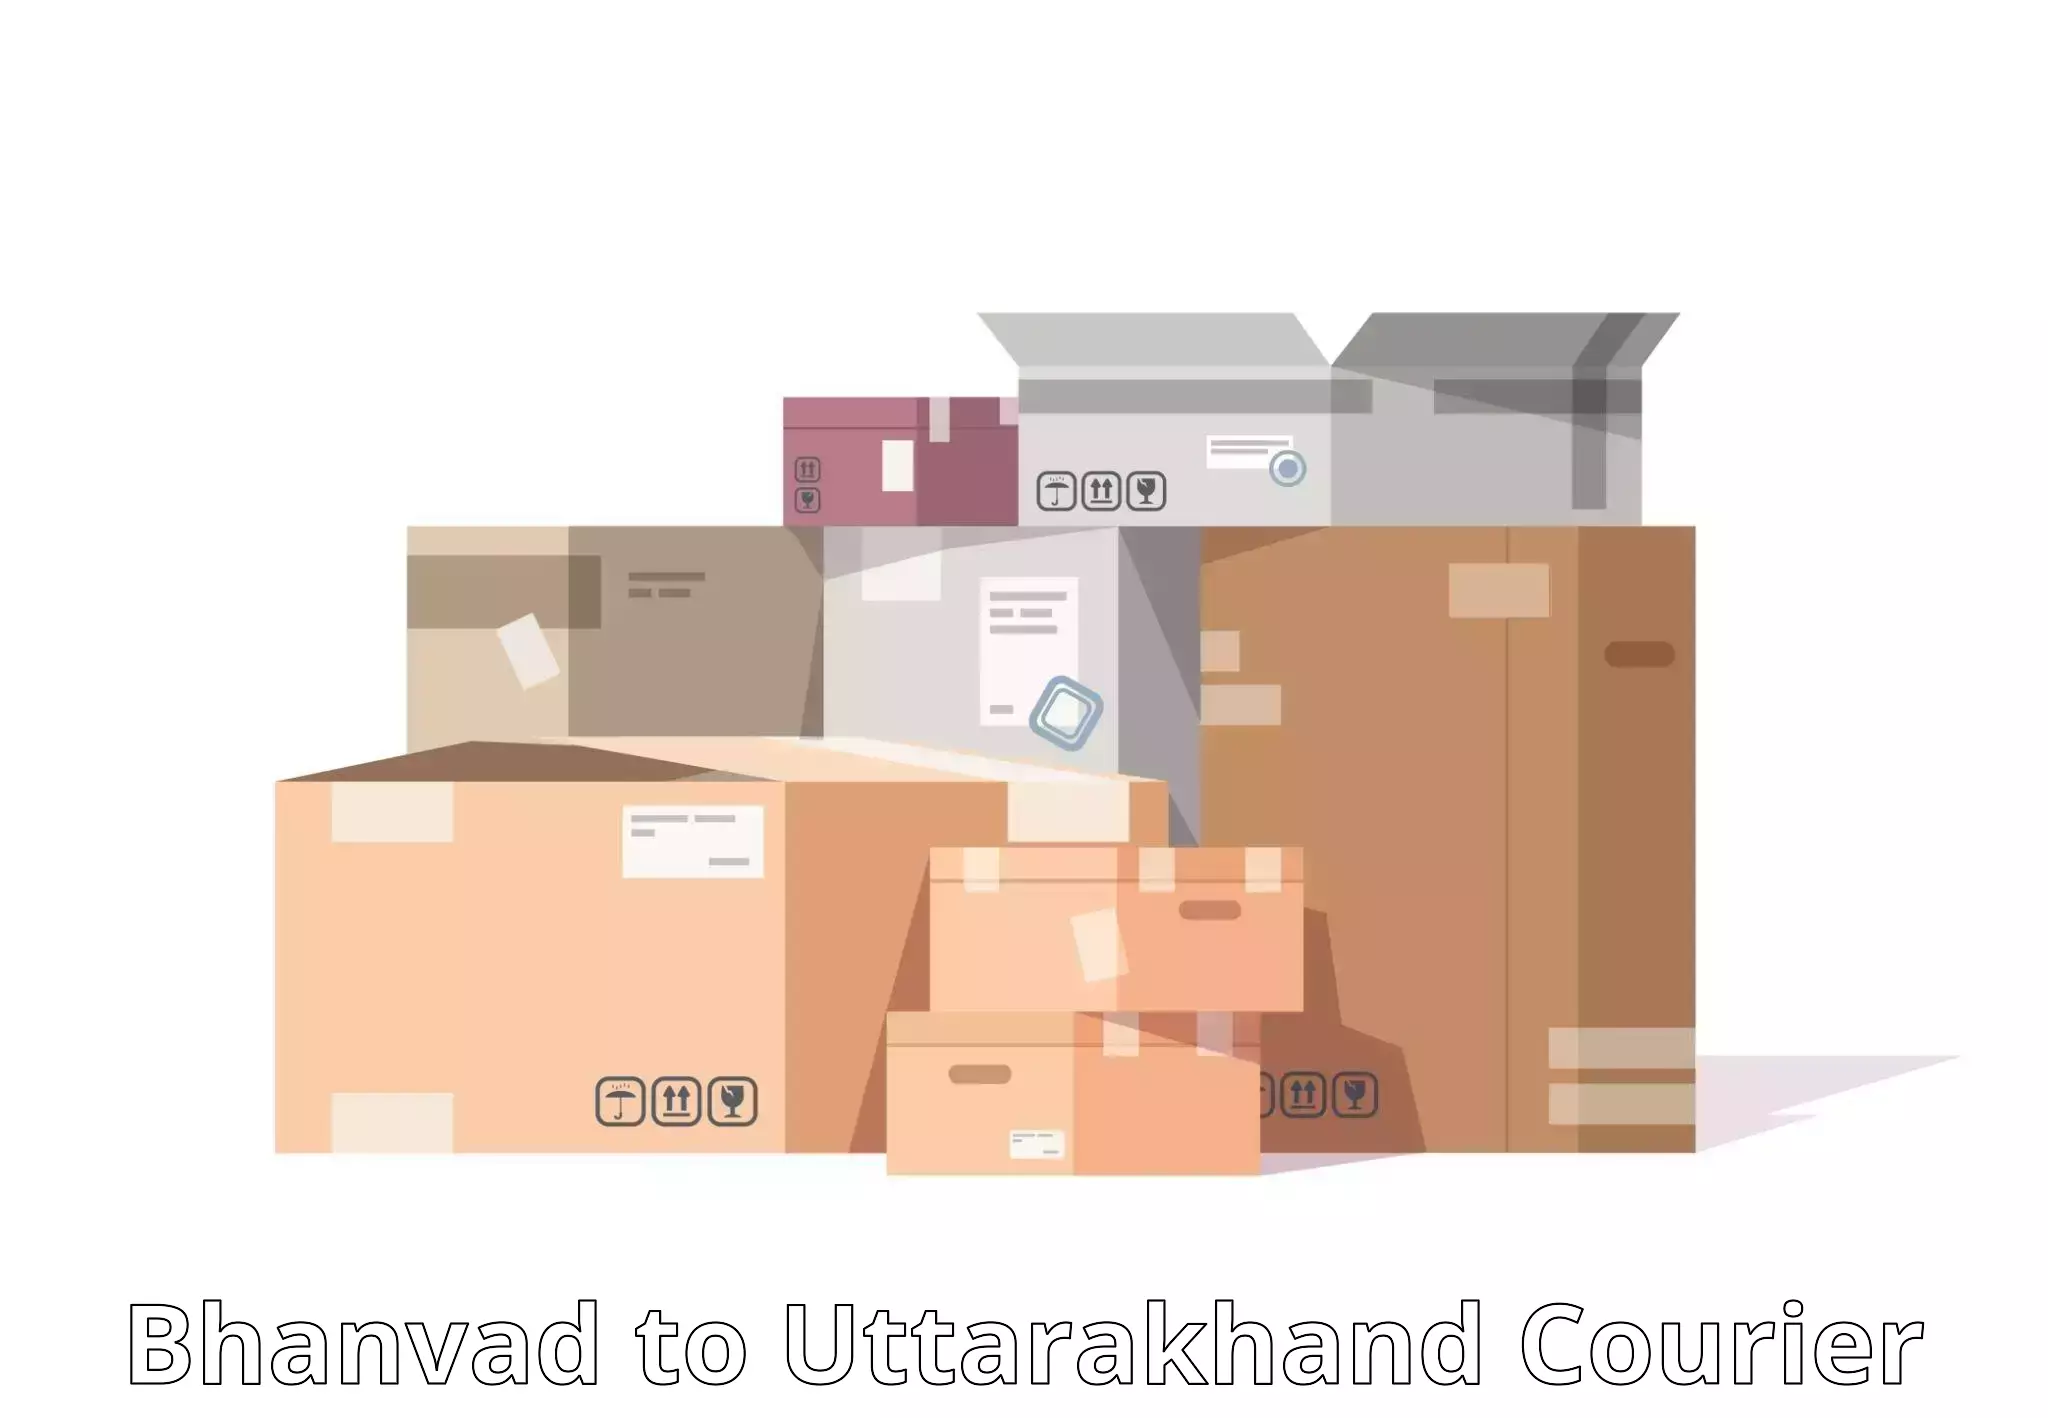 Courier service efficiency Bhanvad to Uttarakhand